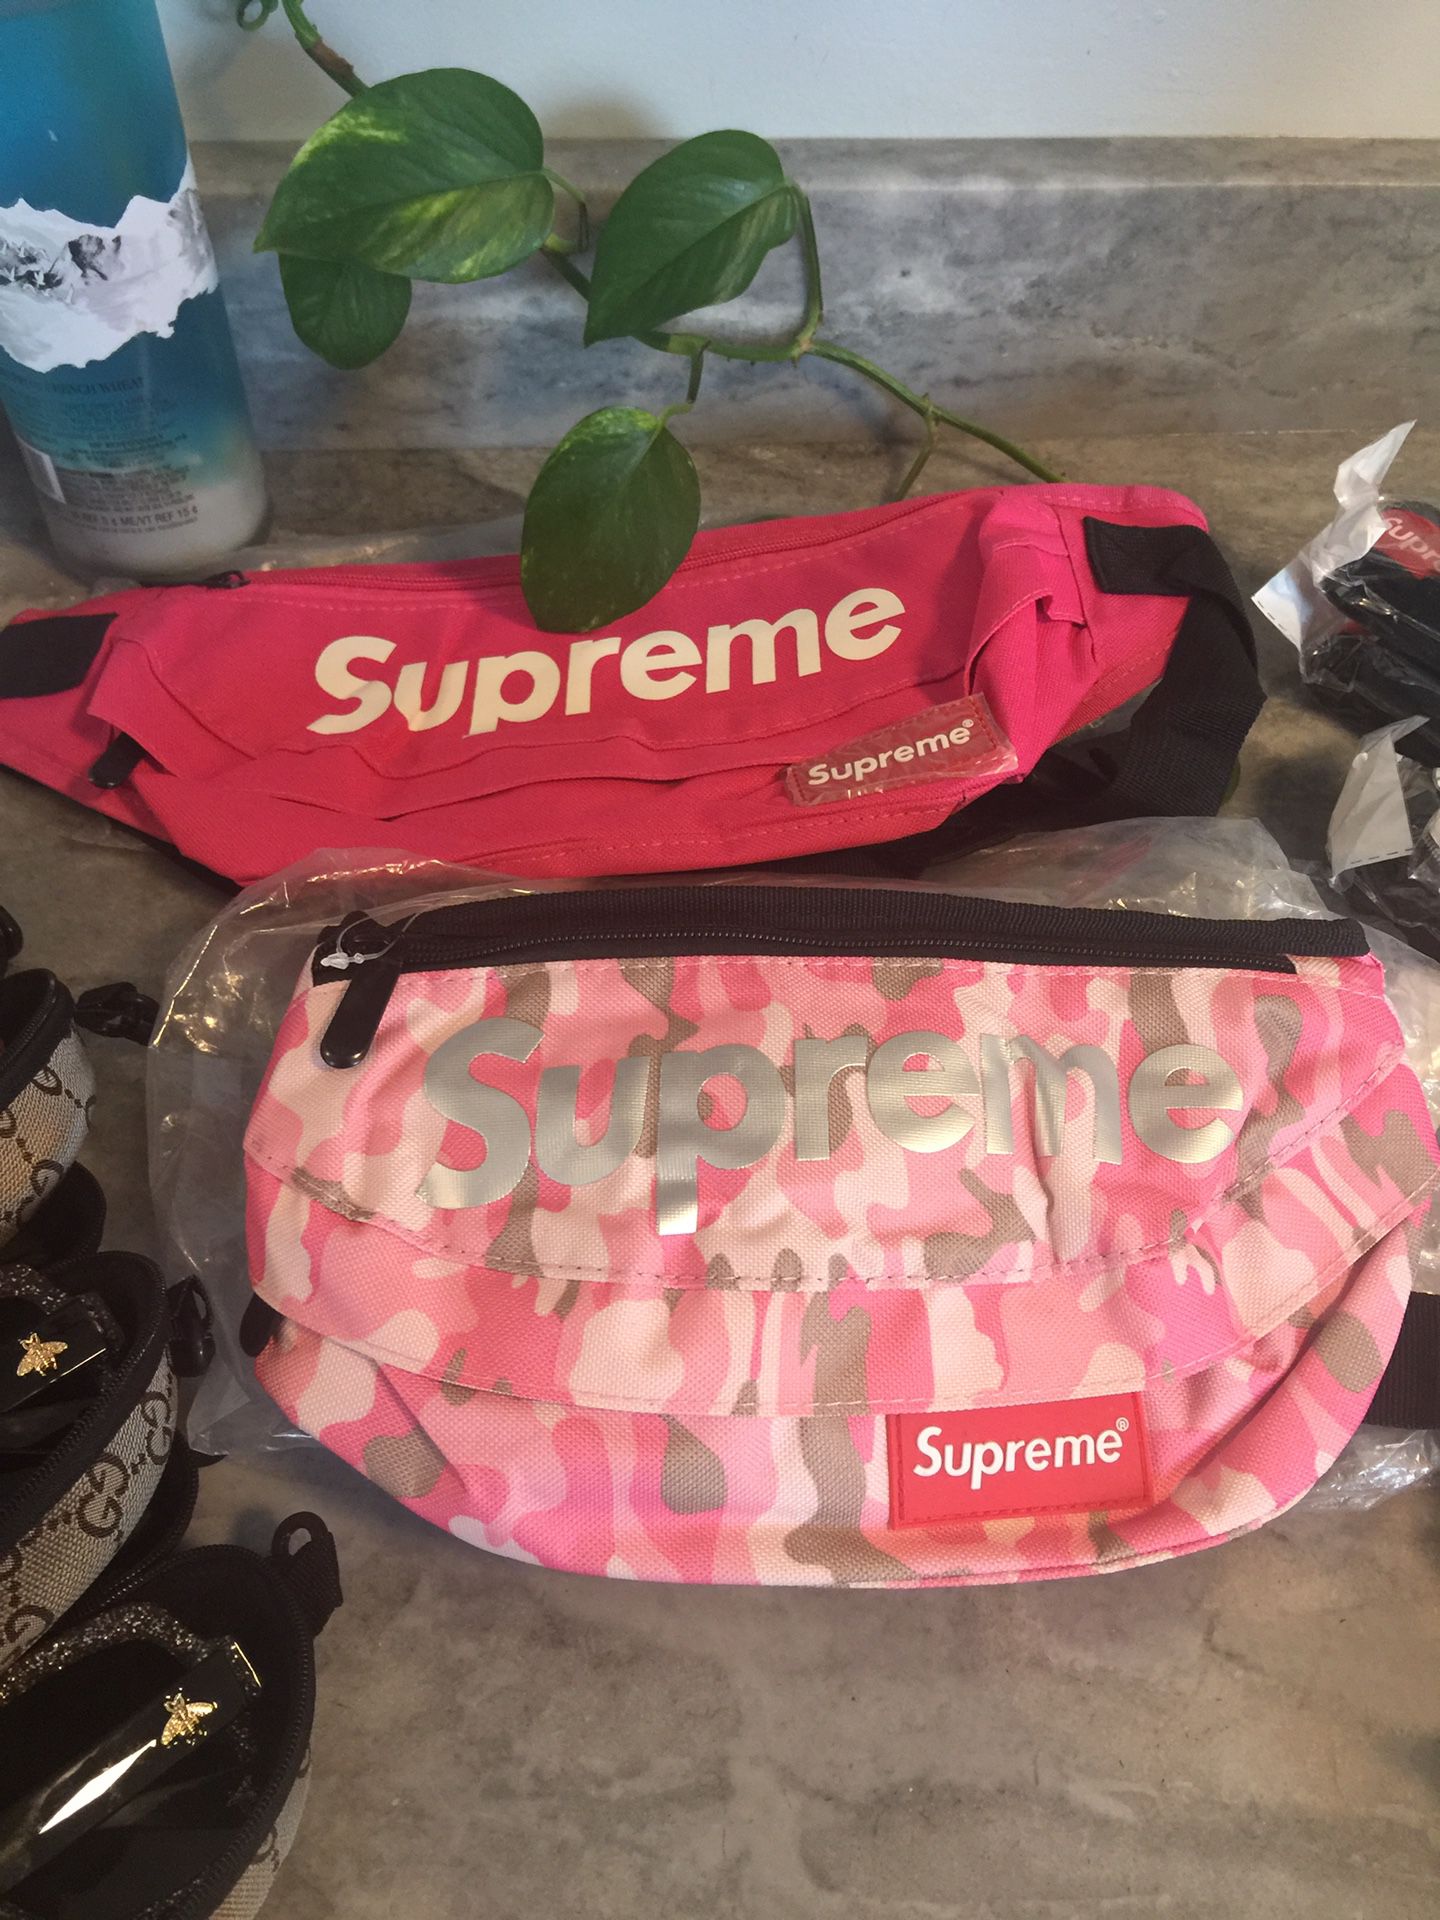 Supreme fanny pack pink camo sold separate